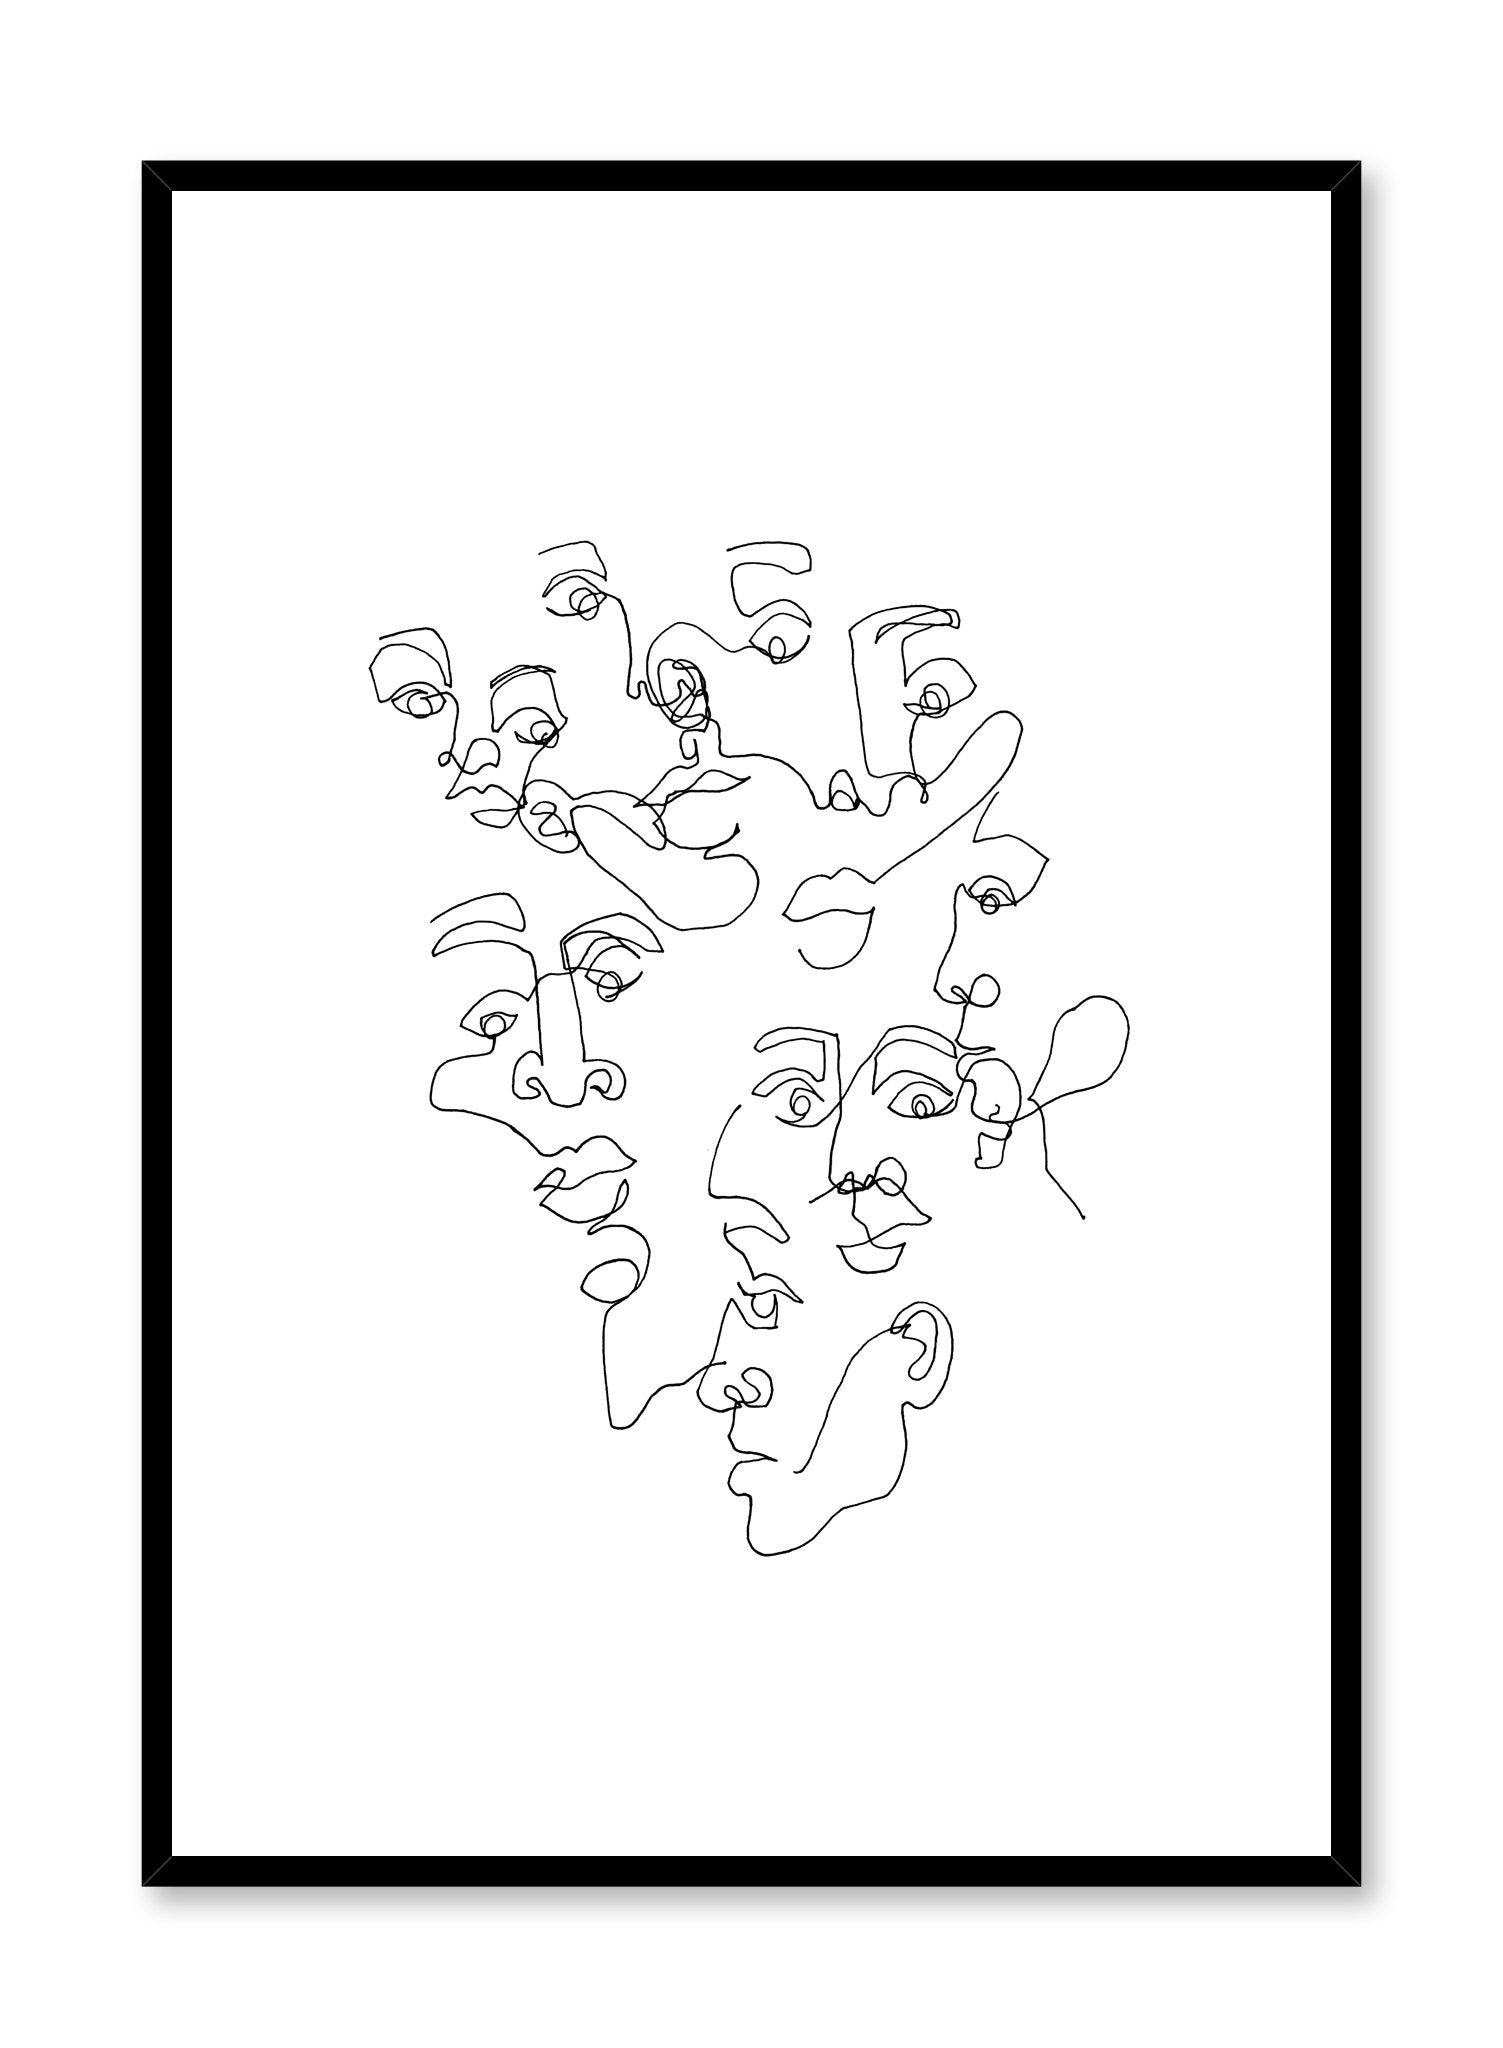 one-in-the-same-abstract-line-art-design-poster-buy-at-opposite-wall